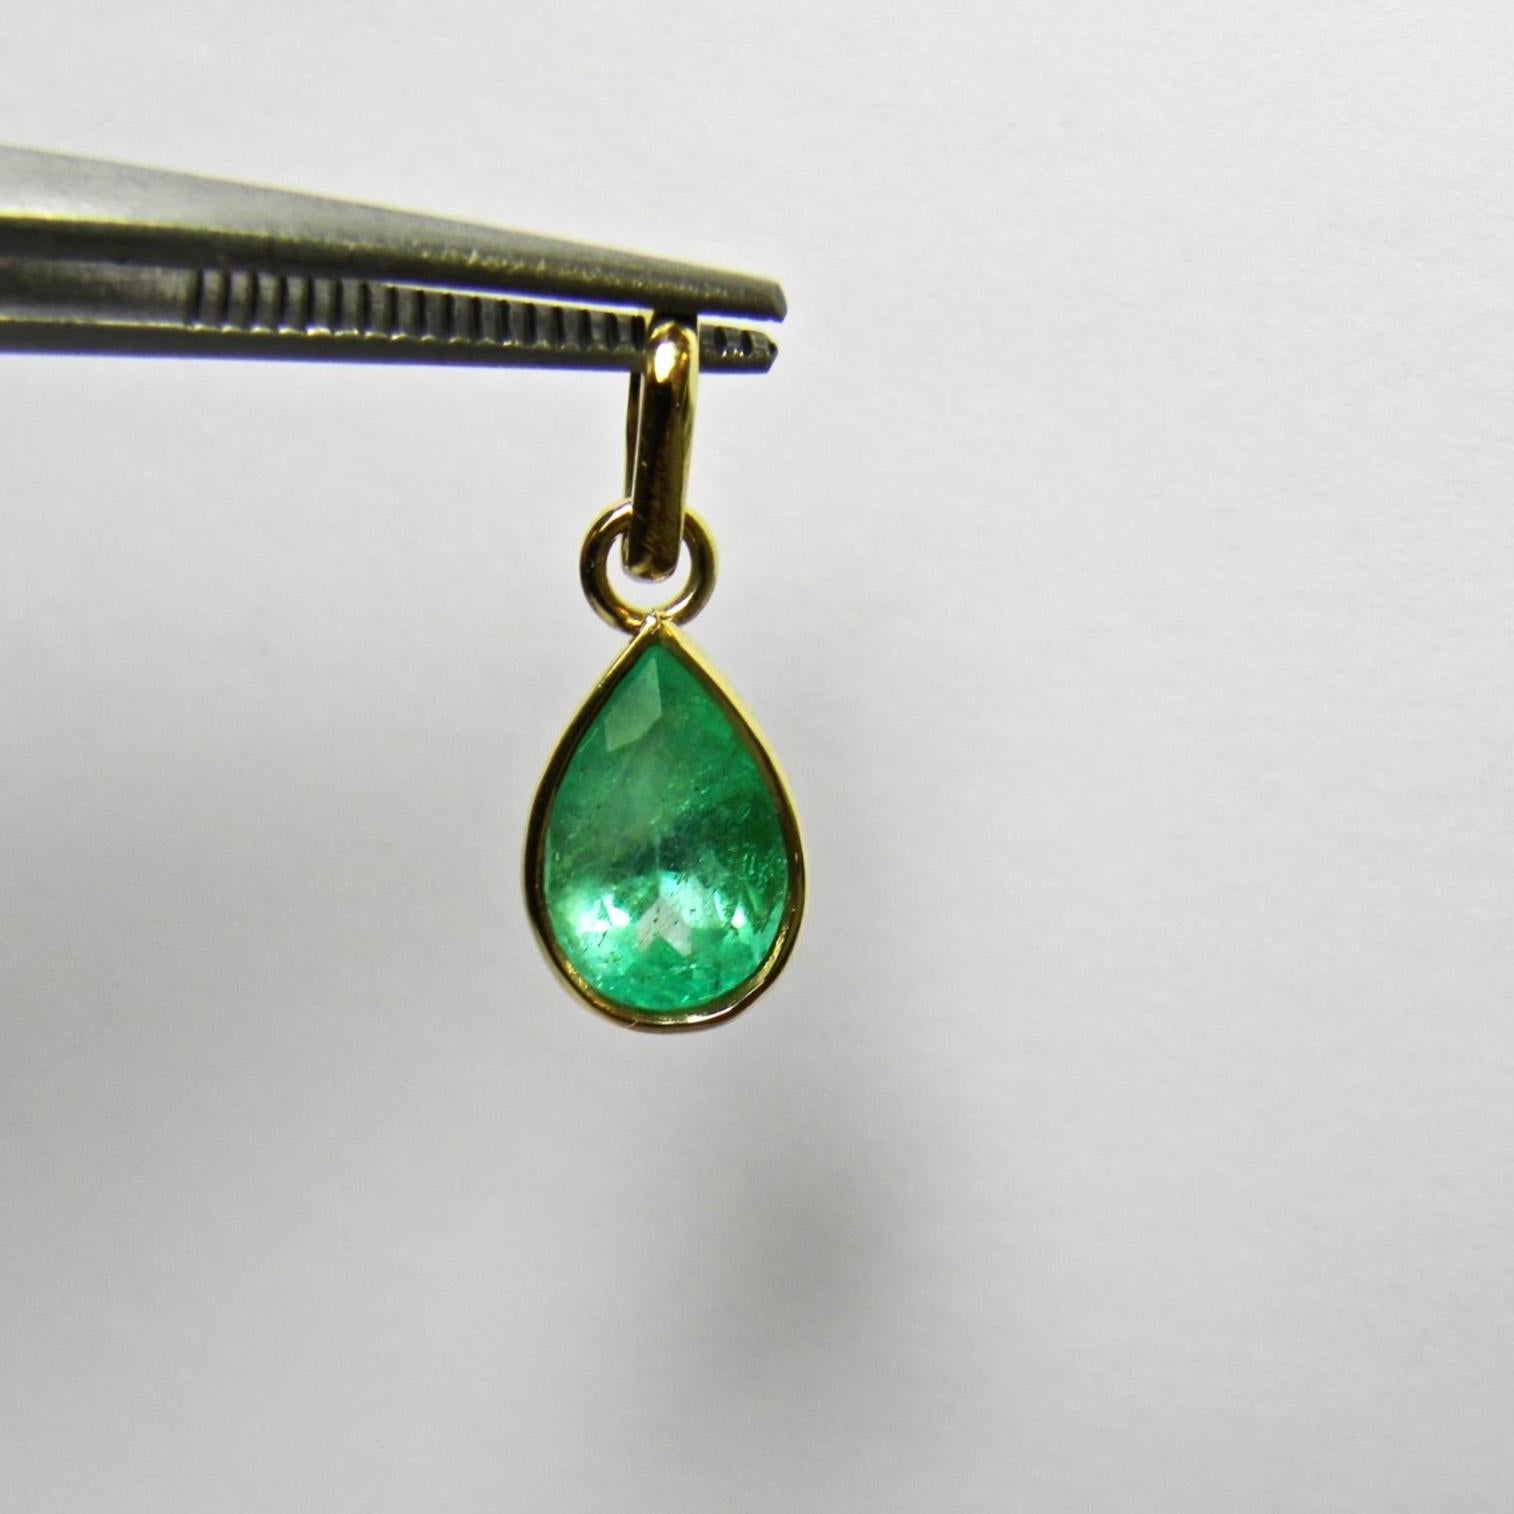 A pear shape natural Colombian emerald solitaire Drop pendant medium green color/ very good clarity
Total Emerald Weight :2.51 Carats
Pendant Measurement: 22.00mm x 8.50mm, rising 6.50mm
Total Pendant Weight: 2.0g
Style: Solitaire - Classic/ Bezel